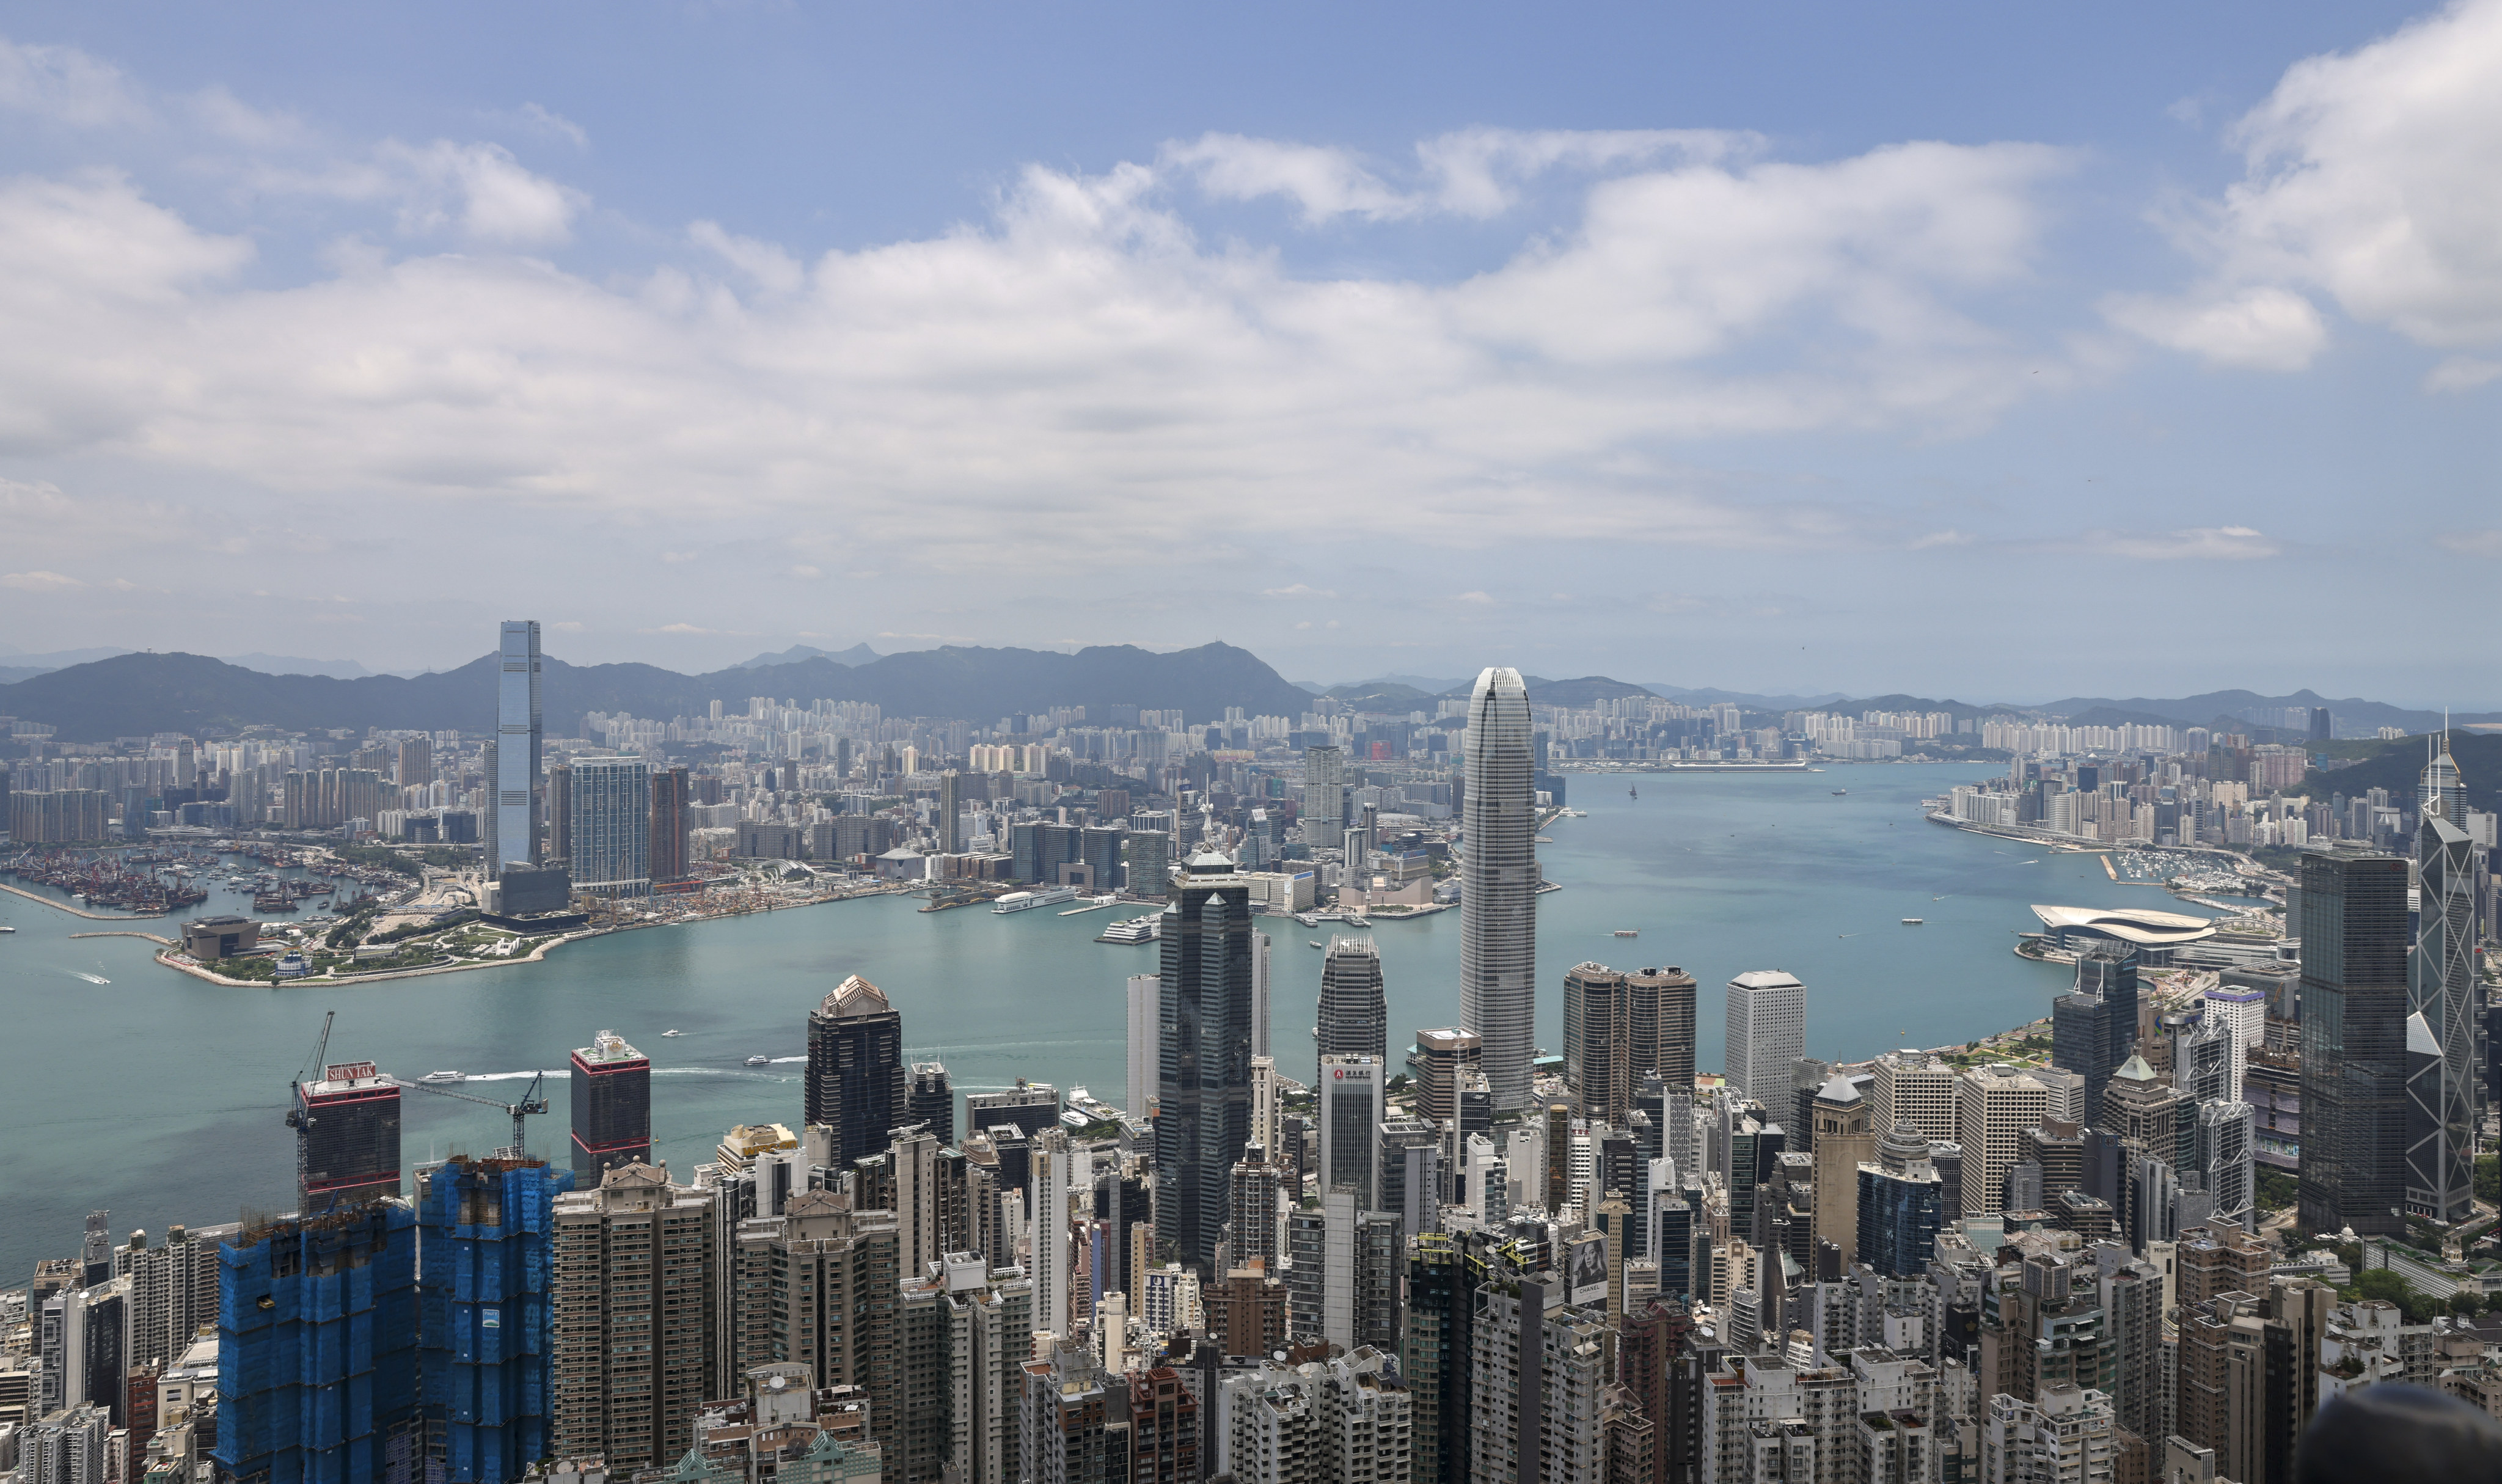 Skyline of Hong Kong’s Victoria Harbour, from The Peak. Photo: K. Y. Cheng